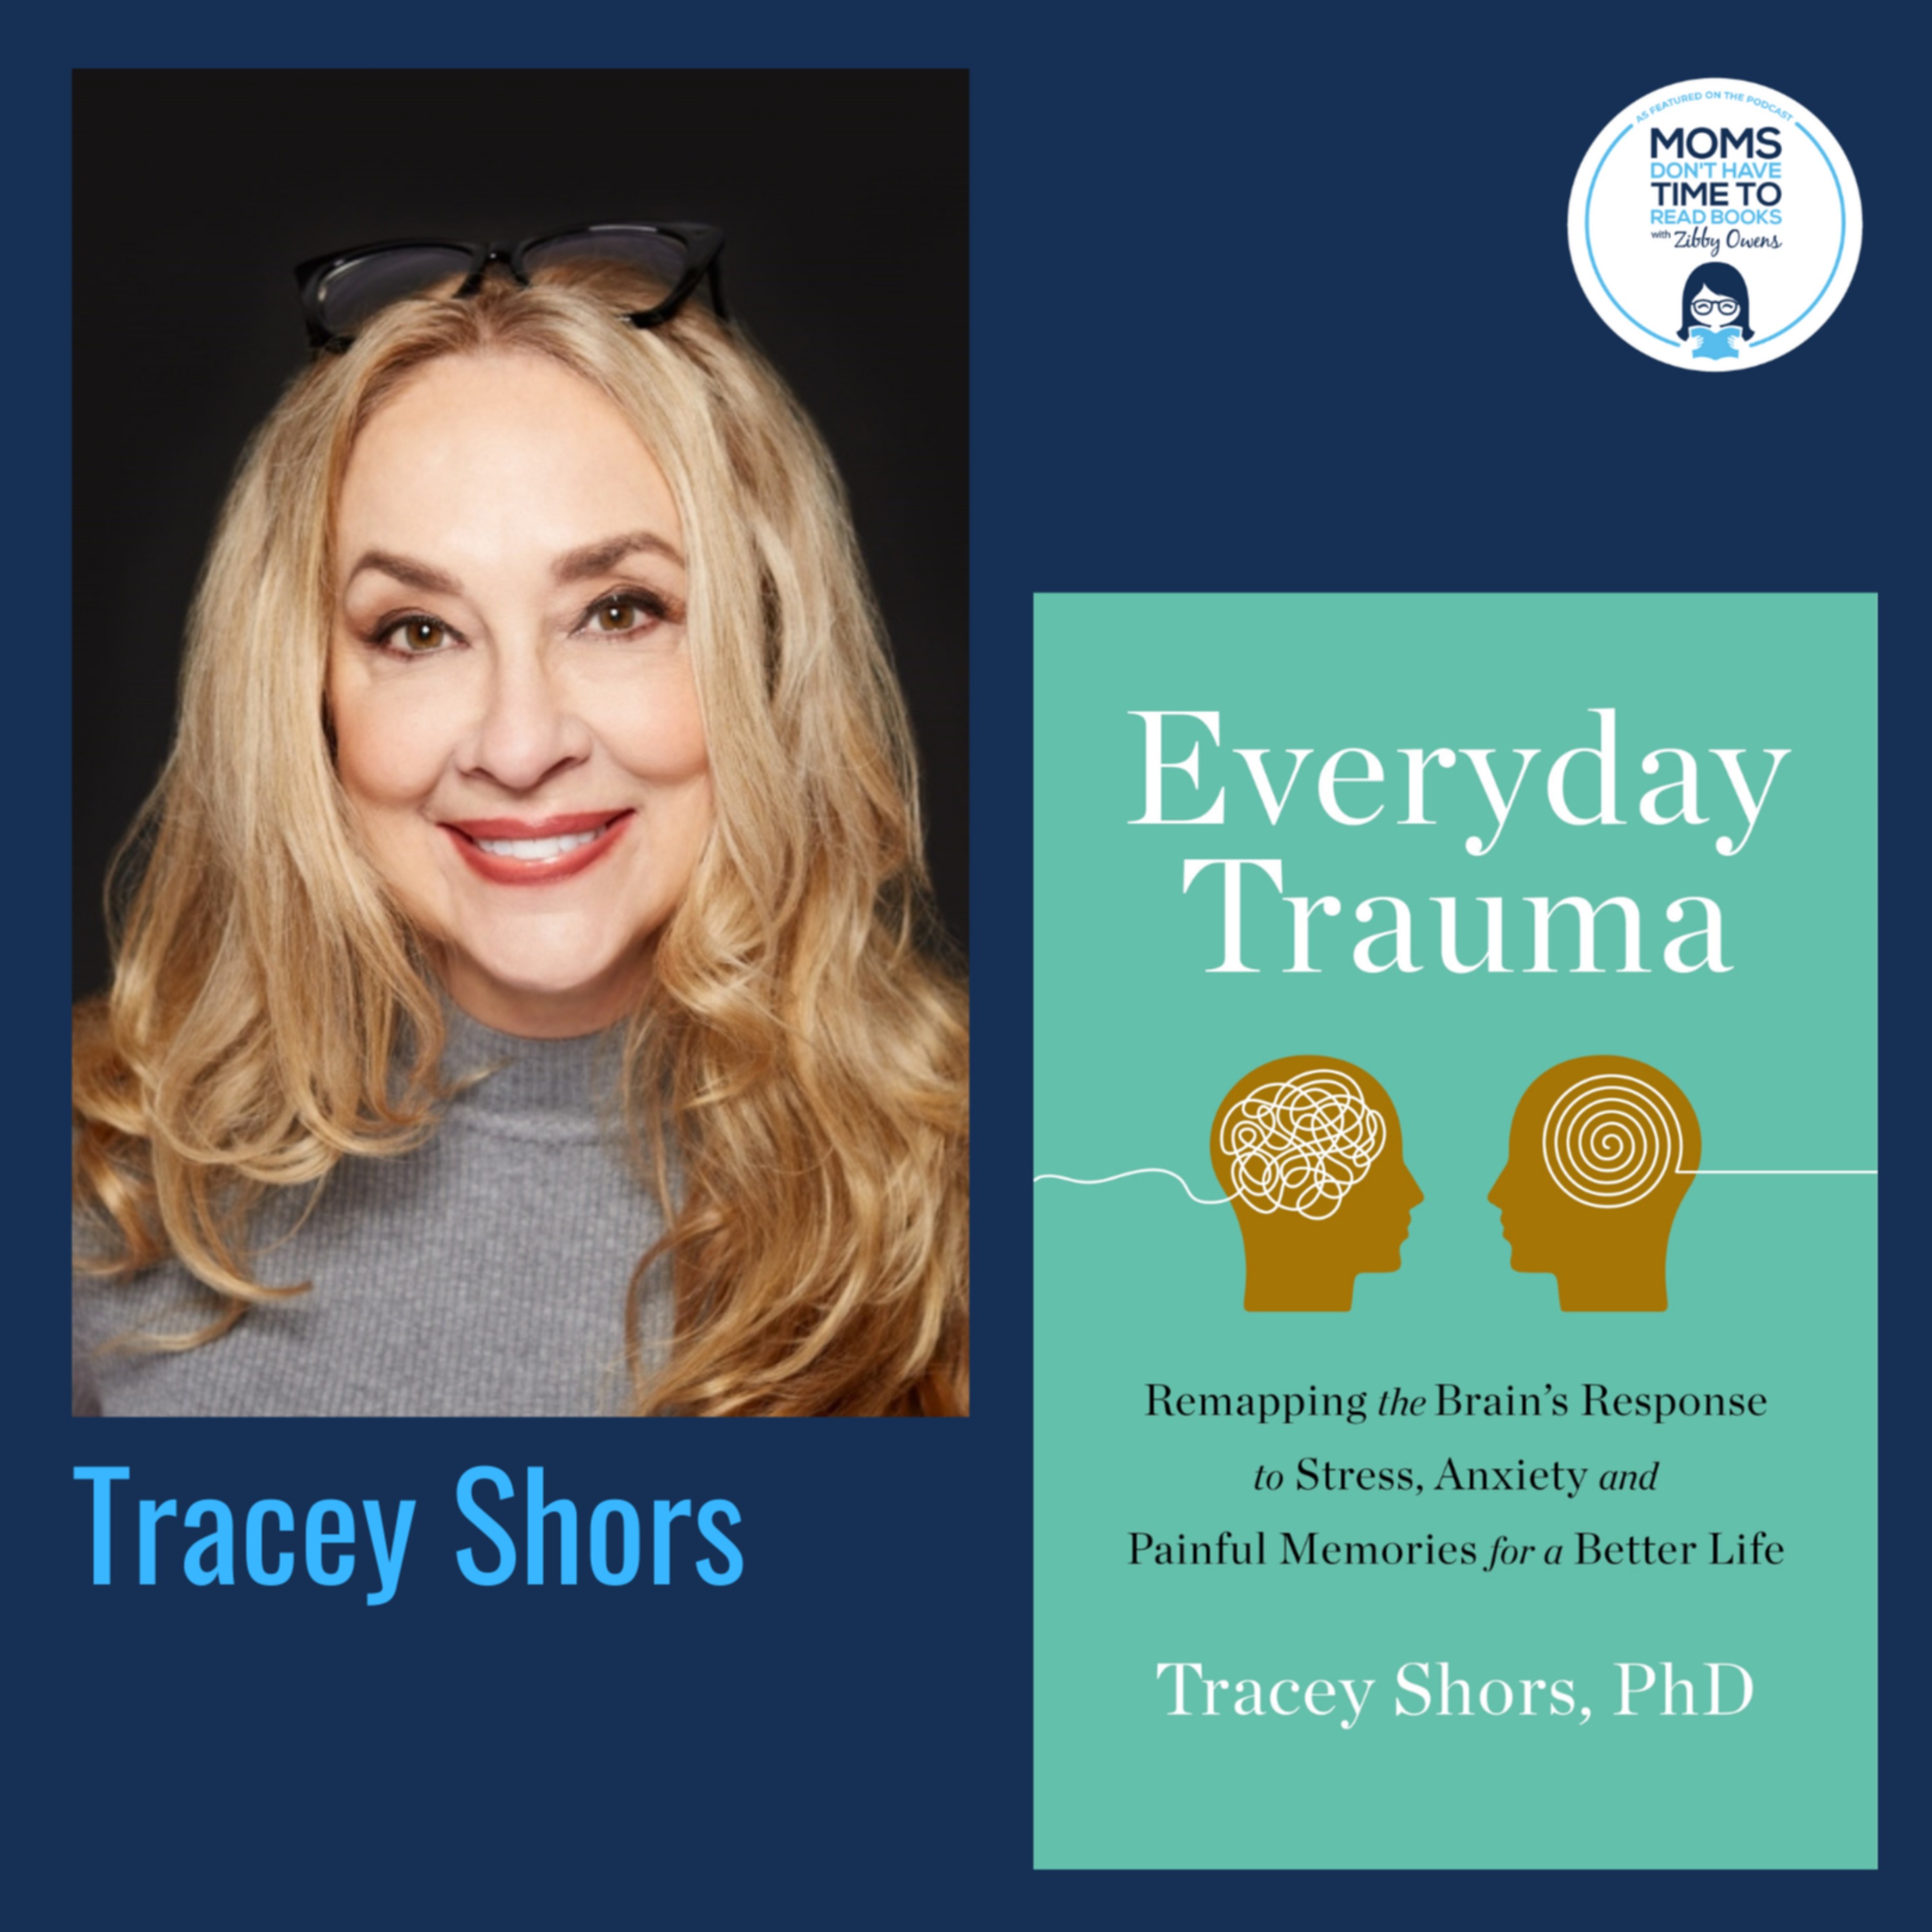 Tracey Shors, EVERYDAY TRAUMA: Remapping the Brain's Response to Stress, Anxiety, and Painful Memories for a Better Life